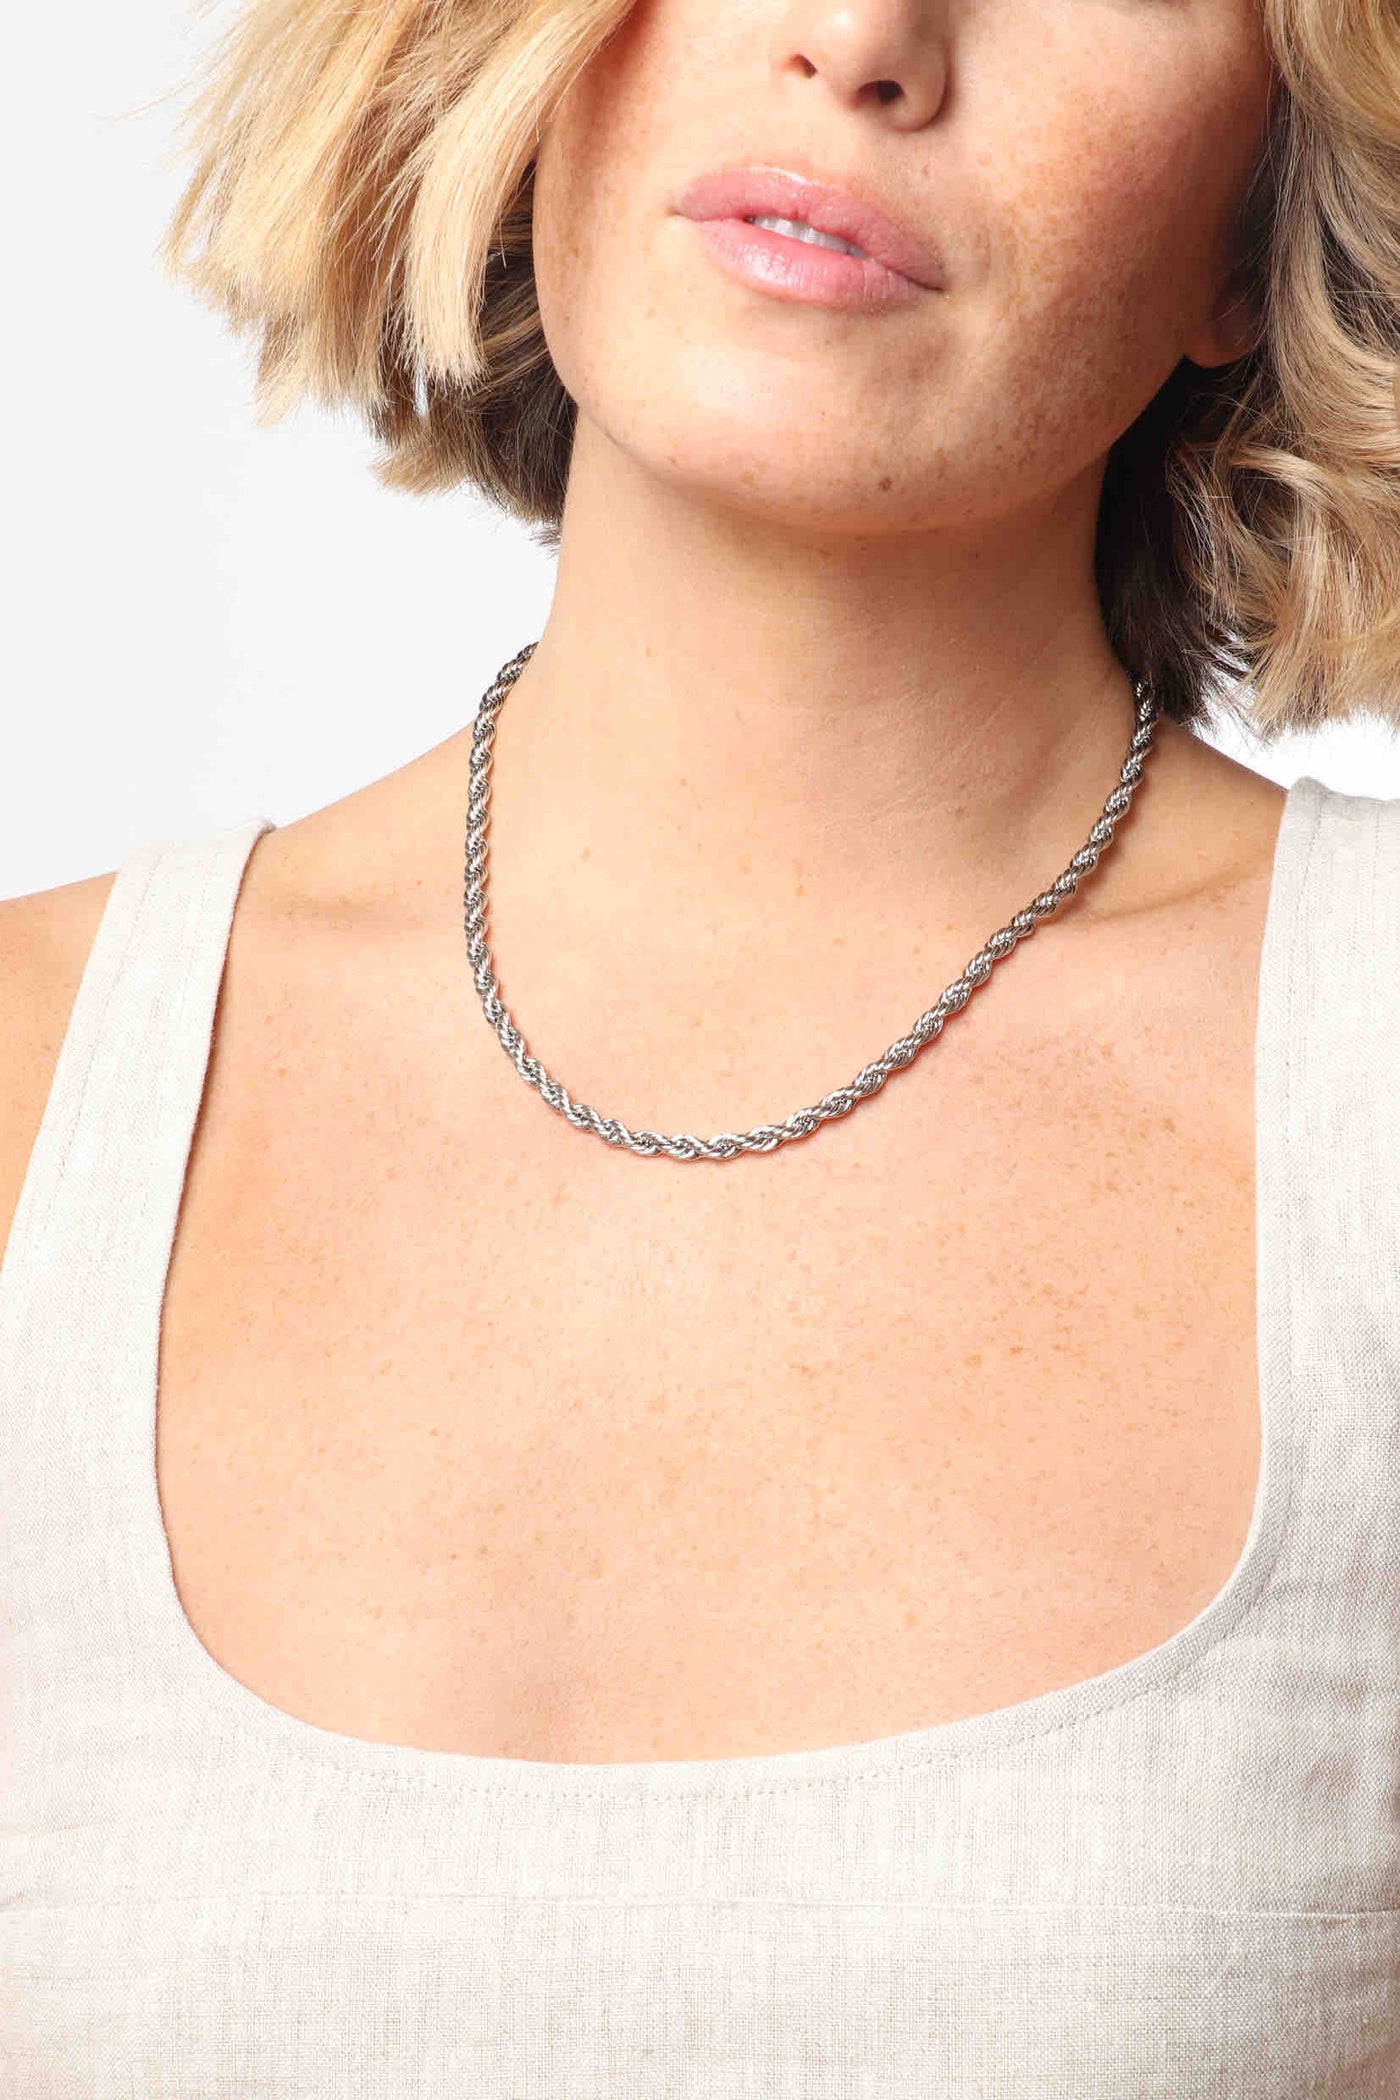 Marrin Costello wearing Marrin Costello Jewelry Helix 5mm Chain thick rope twist chain with lobster clasp closure and extender. Waterproof, sustainable, hypoallergenic. Polished stainless steel.